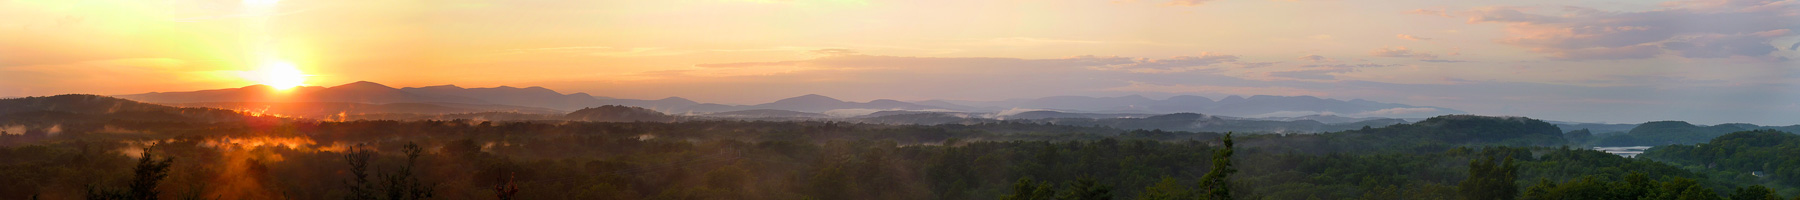 Panoramic shot of a sunset over blue, purple, and black-silhouetted mountains.